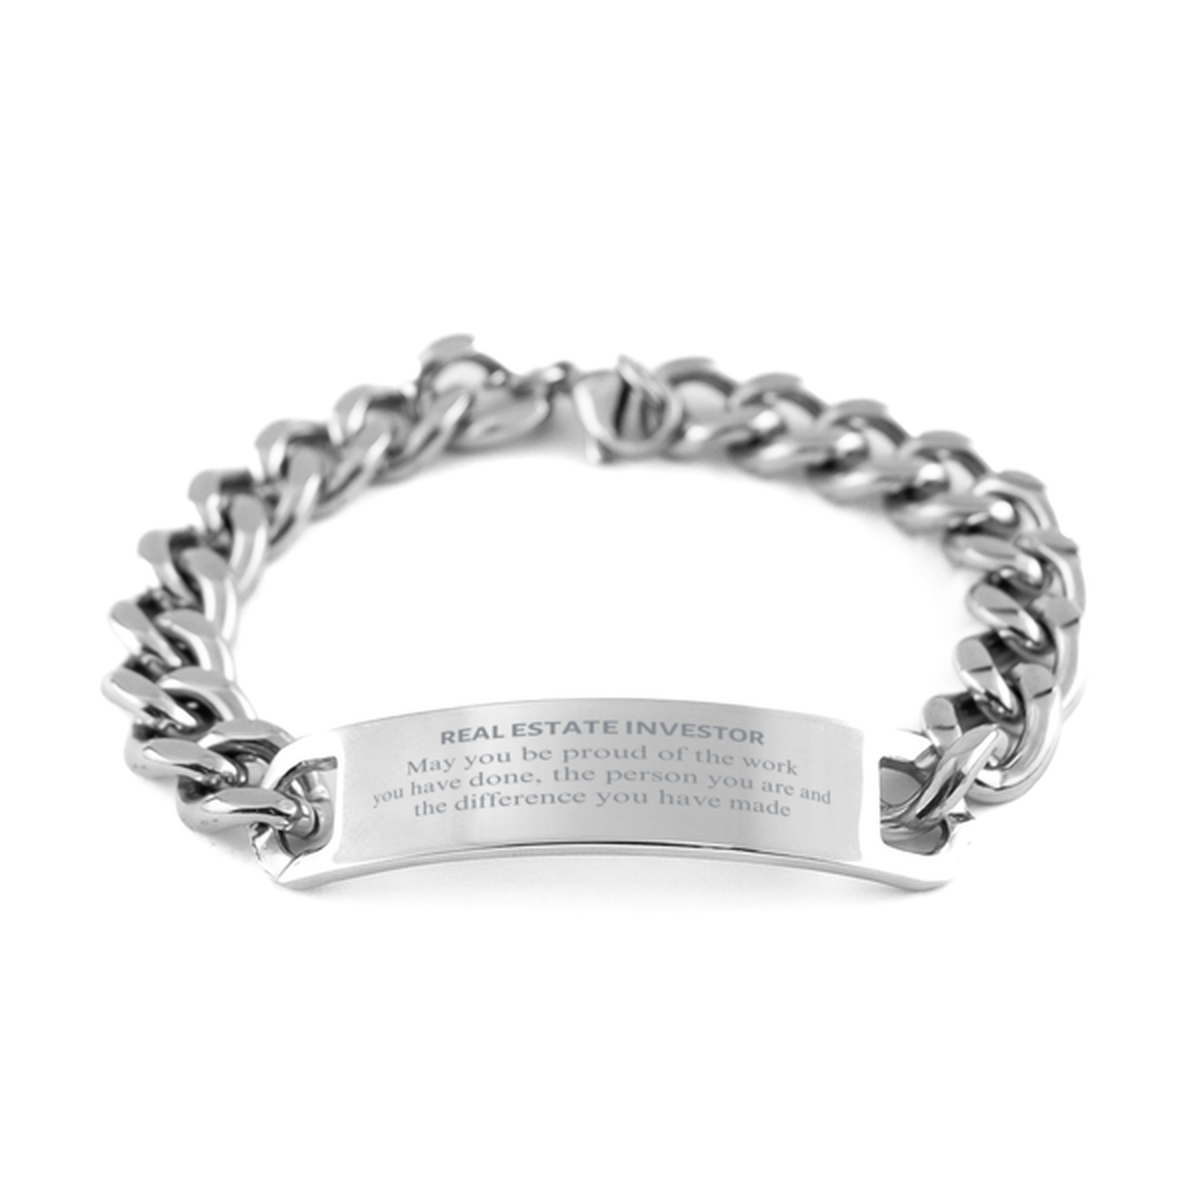 Real Estate Investor May you be proud of the work you have done, Retirement Real Estate Investor Cuban Chain Stainless Steel Bracelet for Colleague Appreciation Gifts Amazing for Real Estate Investor